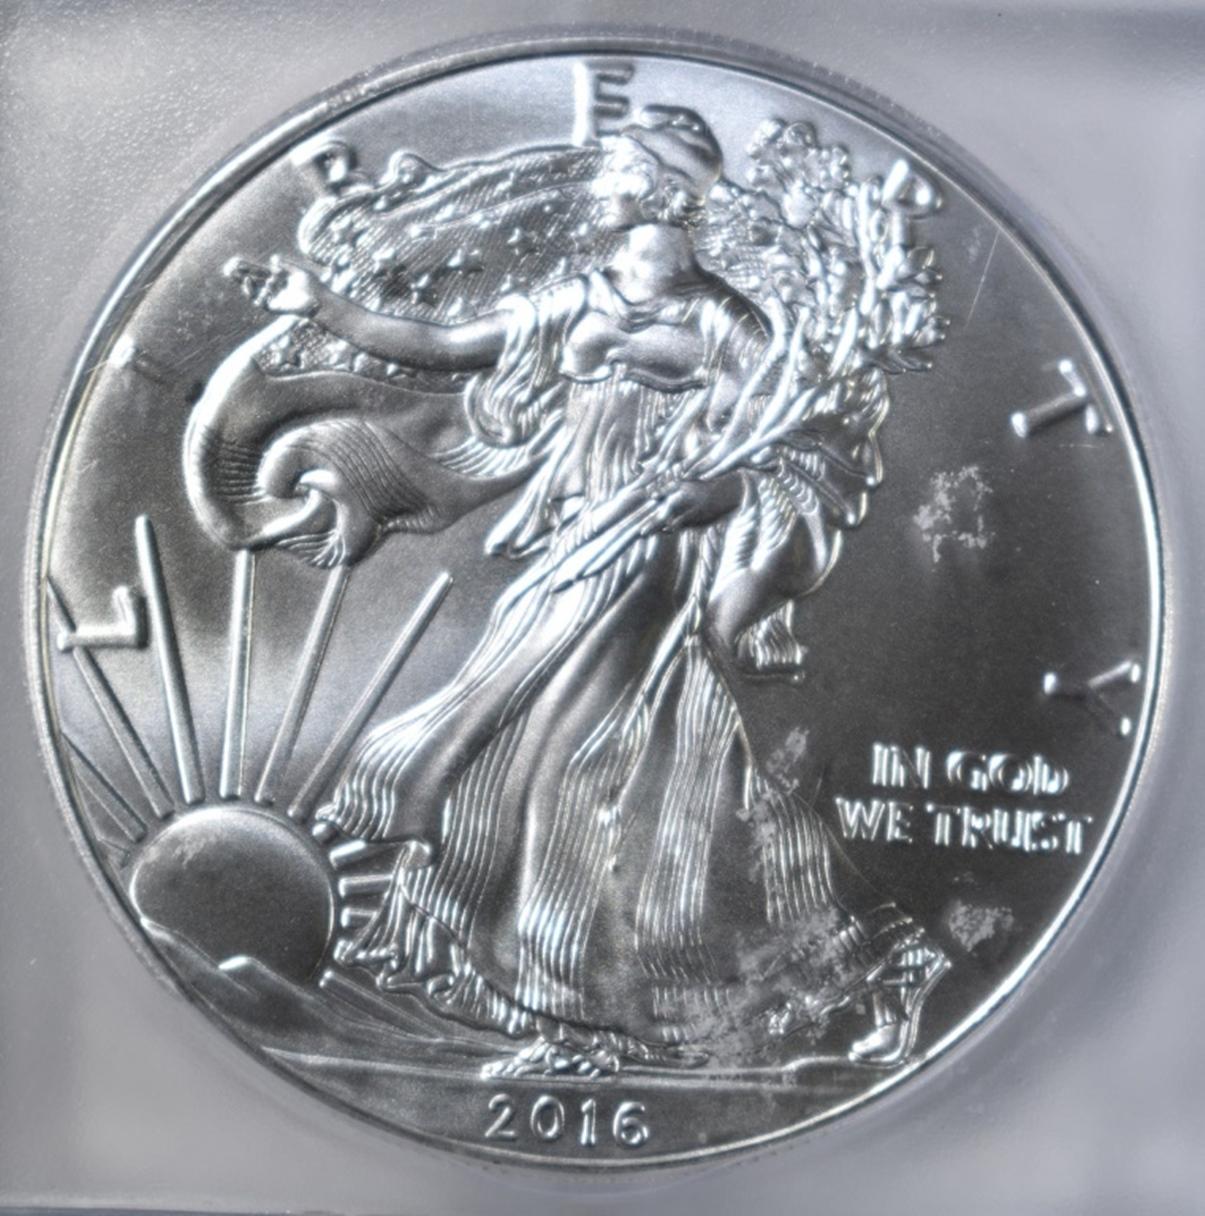 2016 SILVER EAGLE ICG MS-70 FIRST DAY OF ISSUE